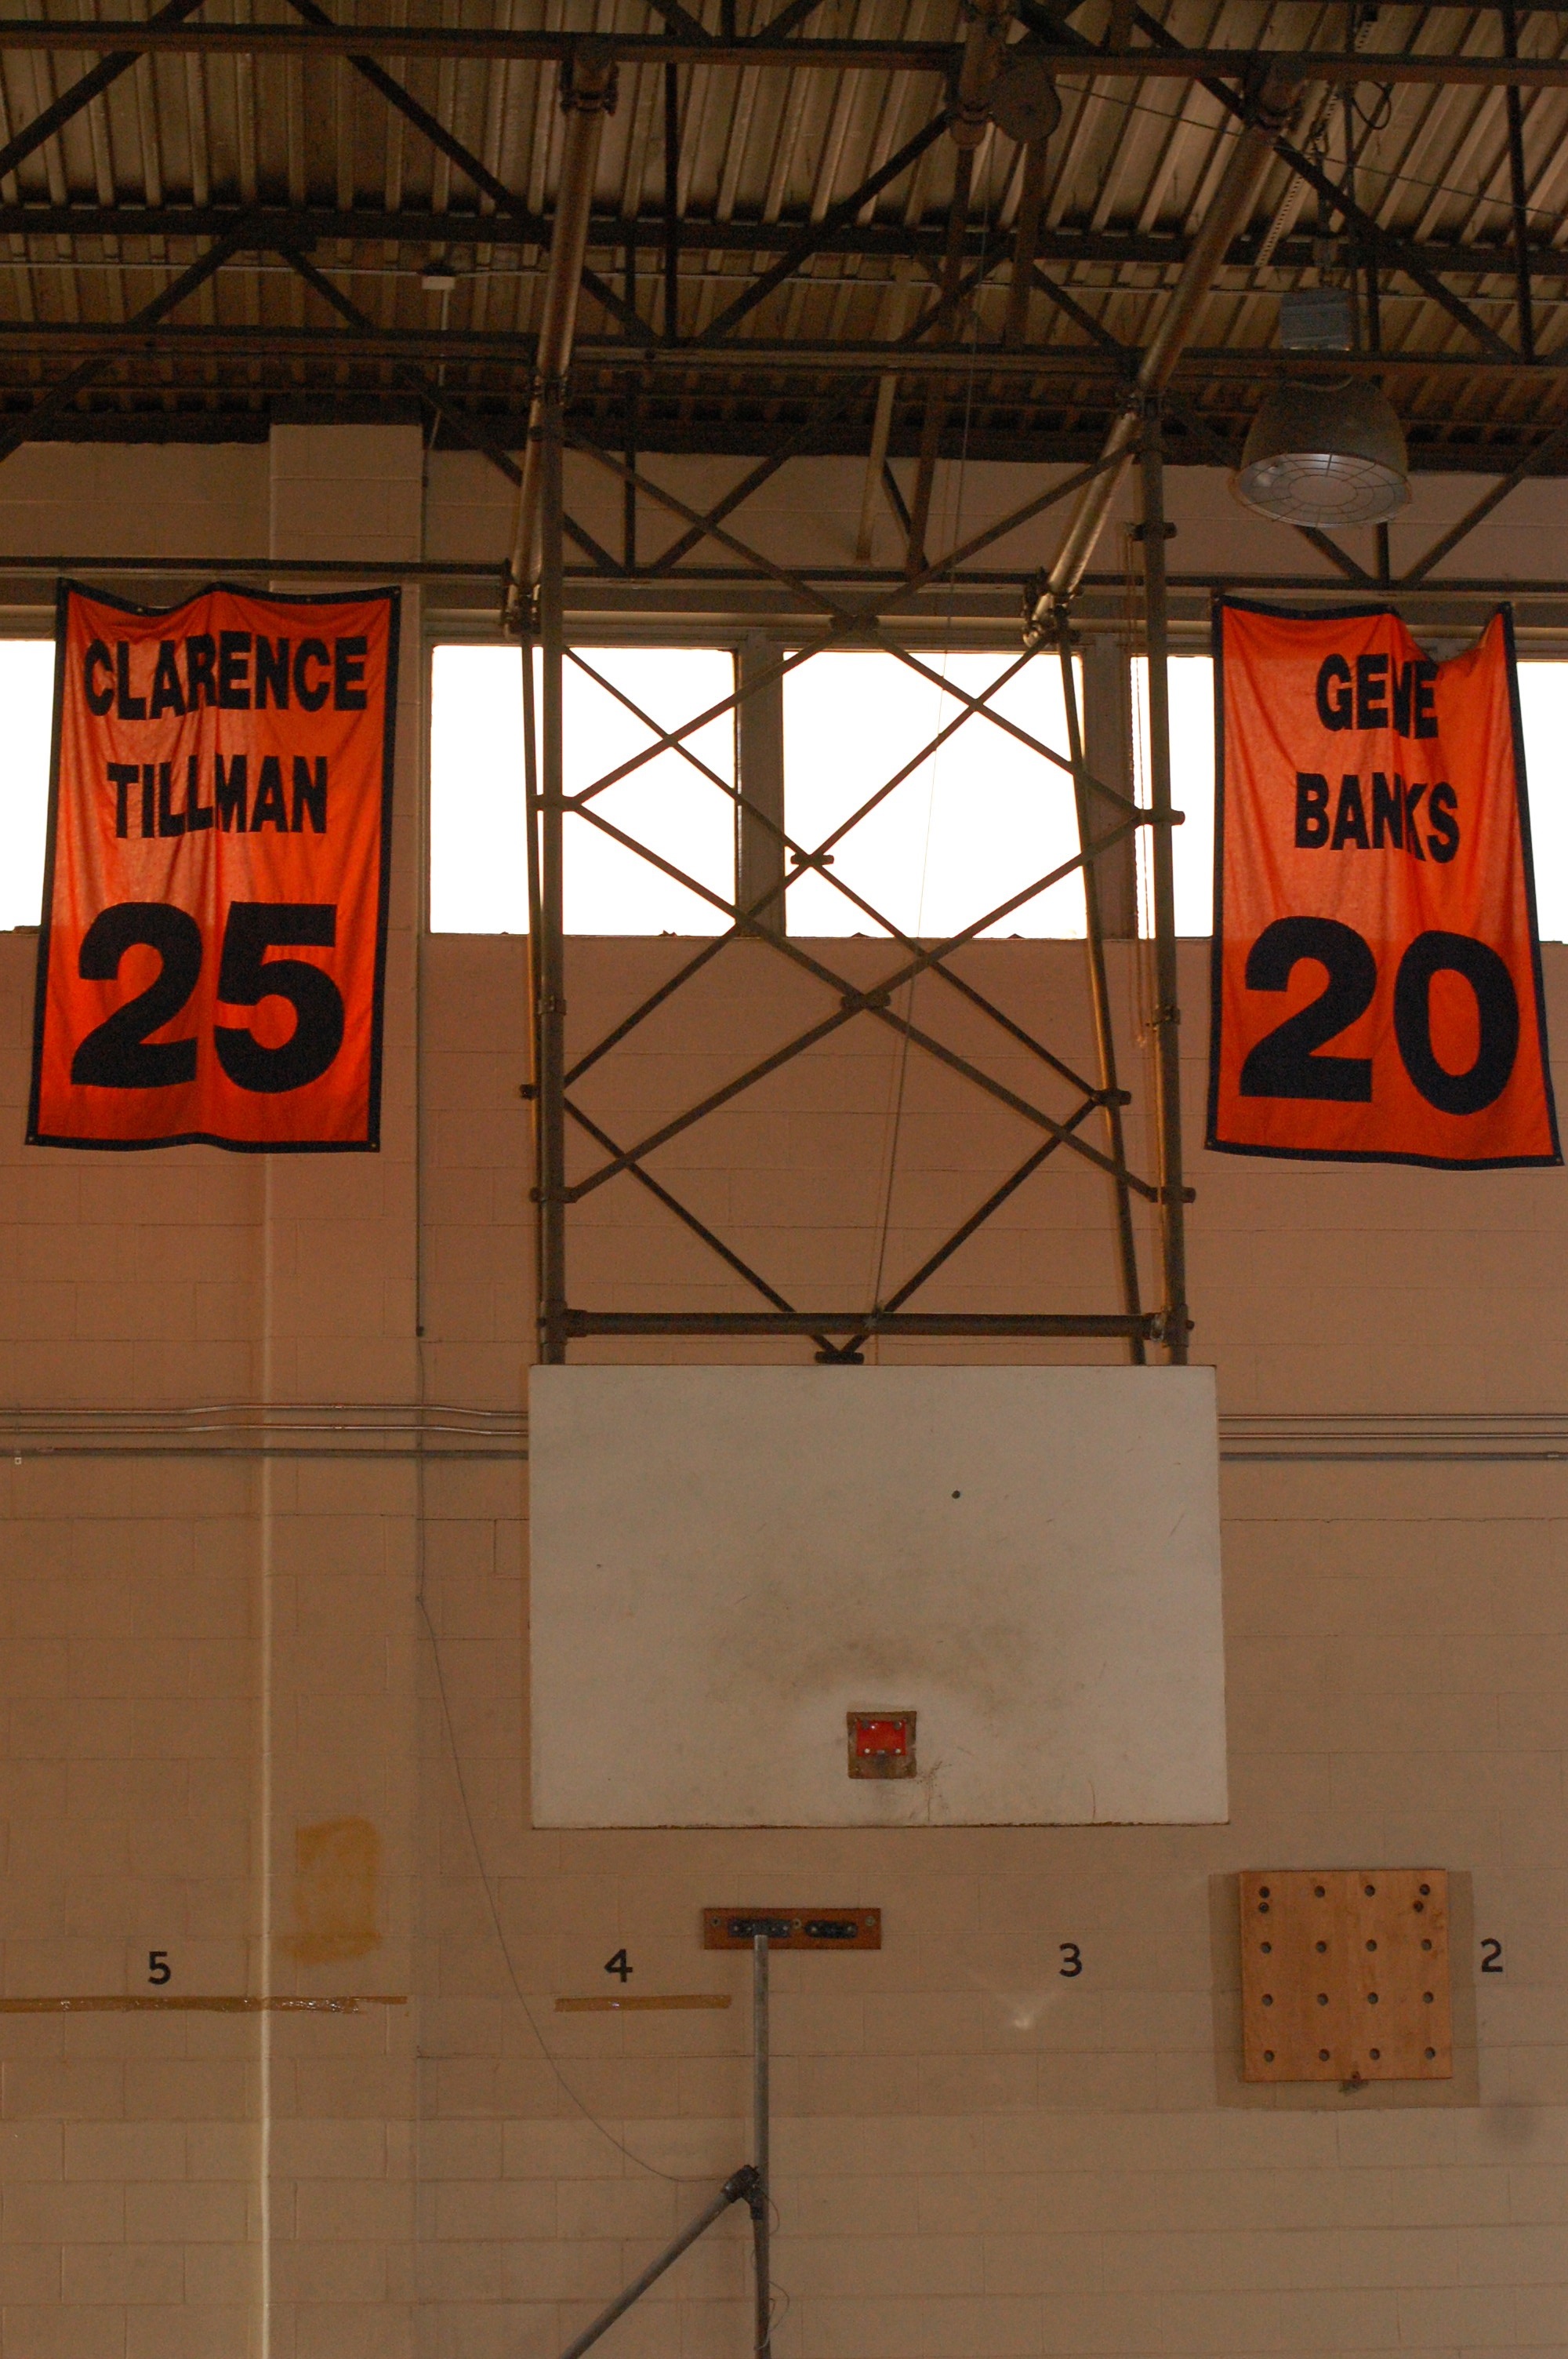 Banners honoring W. Philly legends of the past hang above a broken backboard.